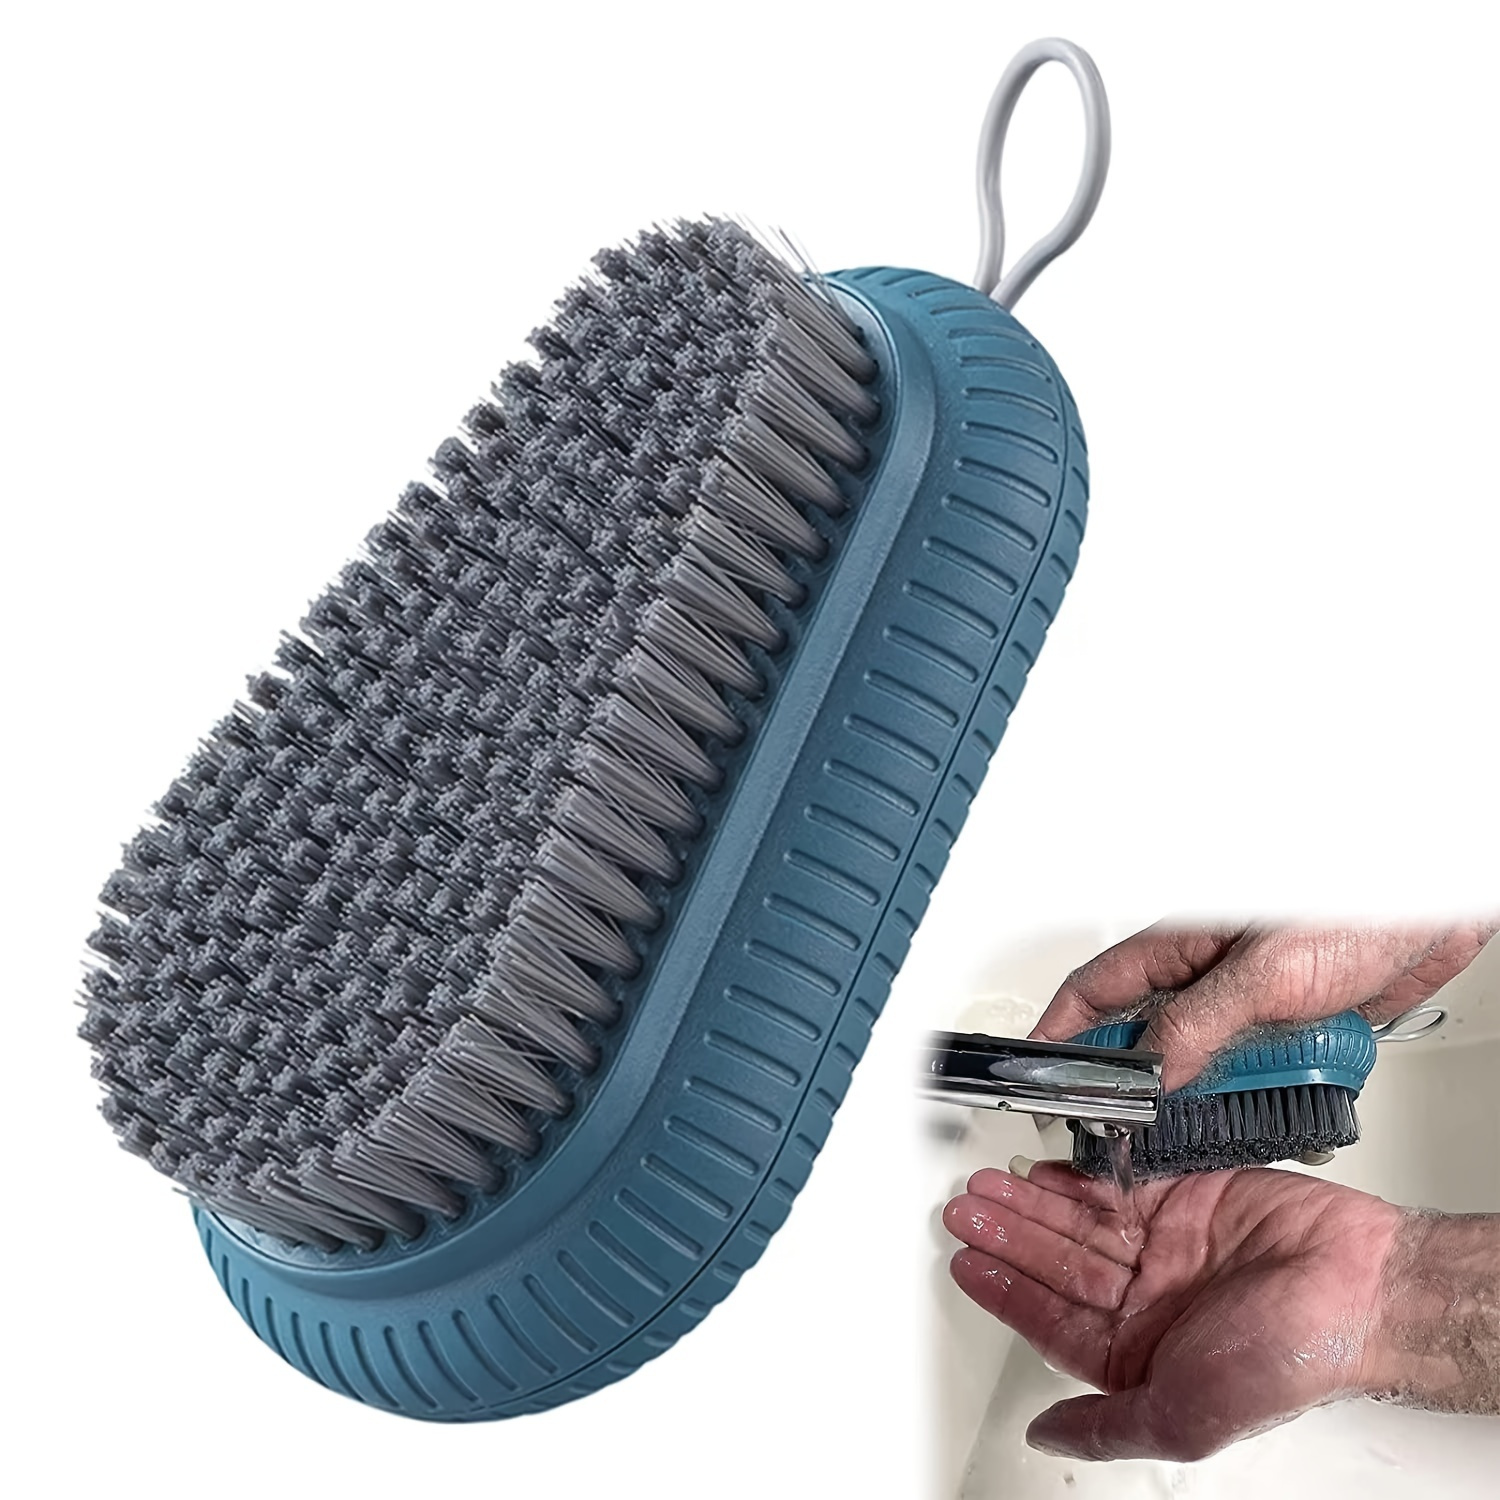 Multifunctional Cleaning Brush Portable Plastic Clothes Shoes Hydraulic  Laundry Brush Hands Cleaning Brush Kitchen Bathroom